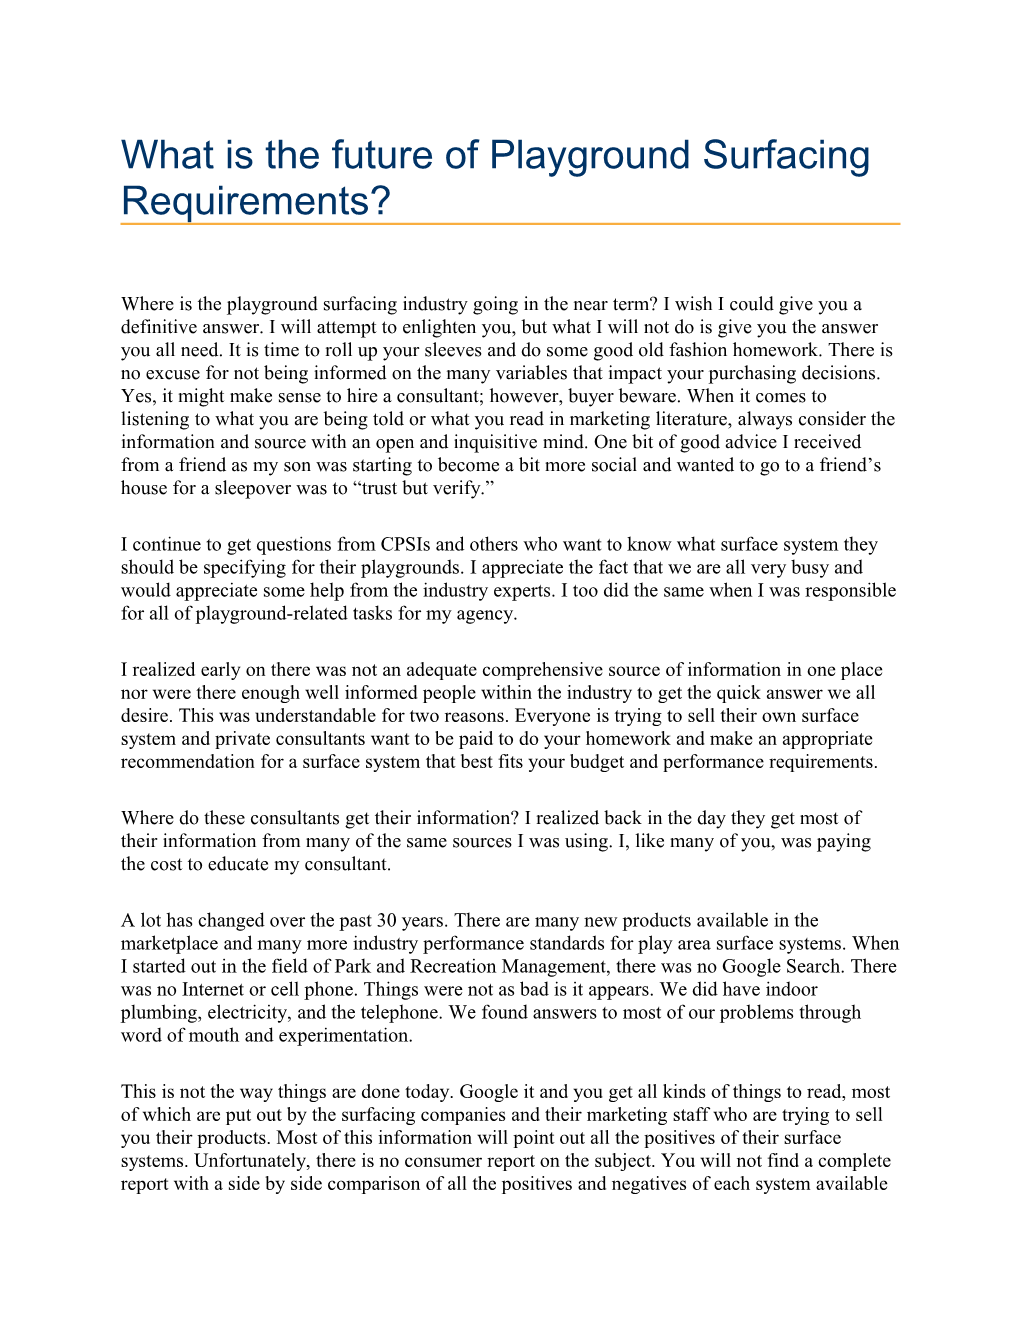 What Is the Future of Playground Surfacing Requirements?